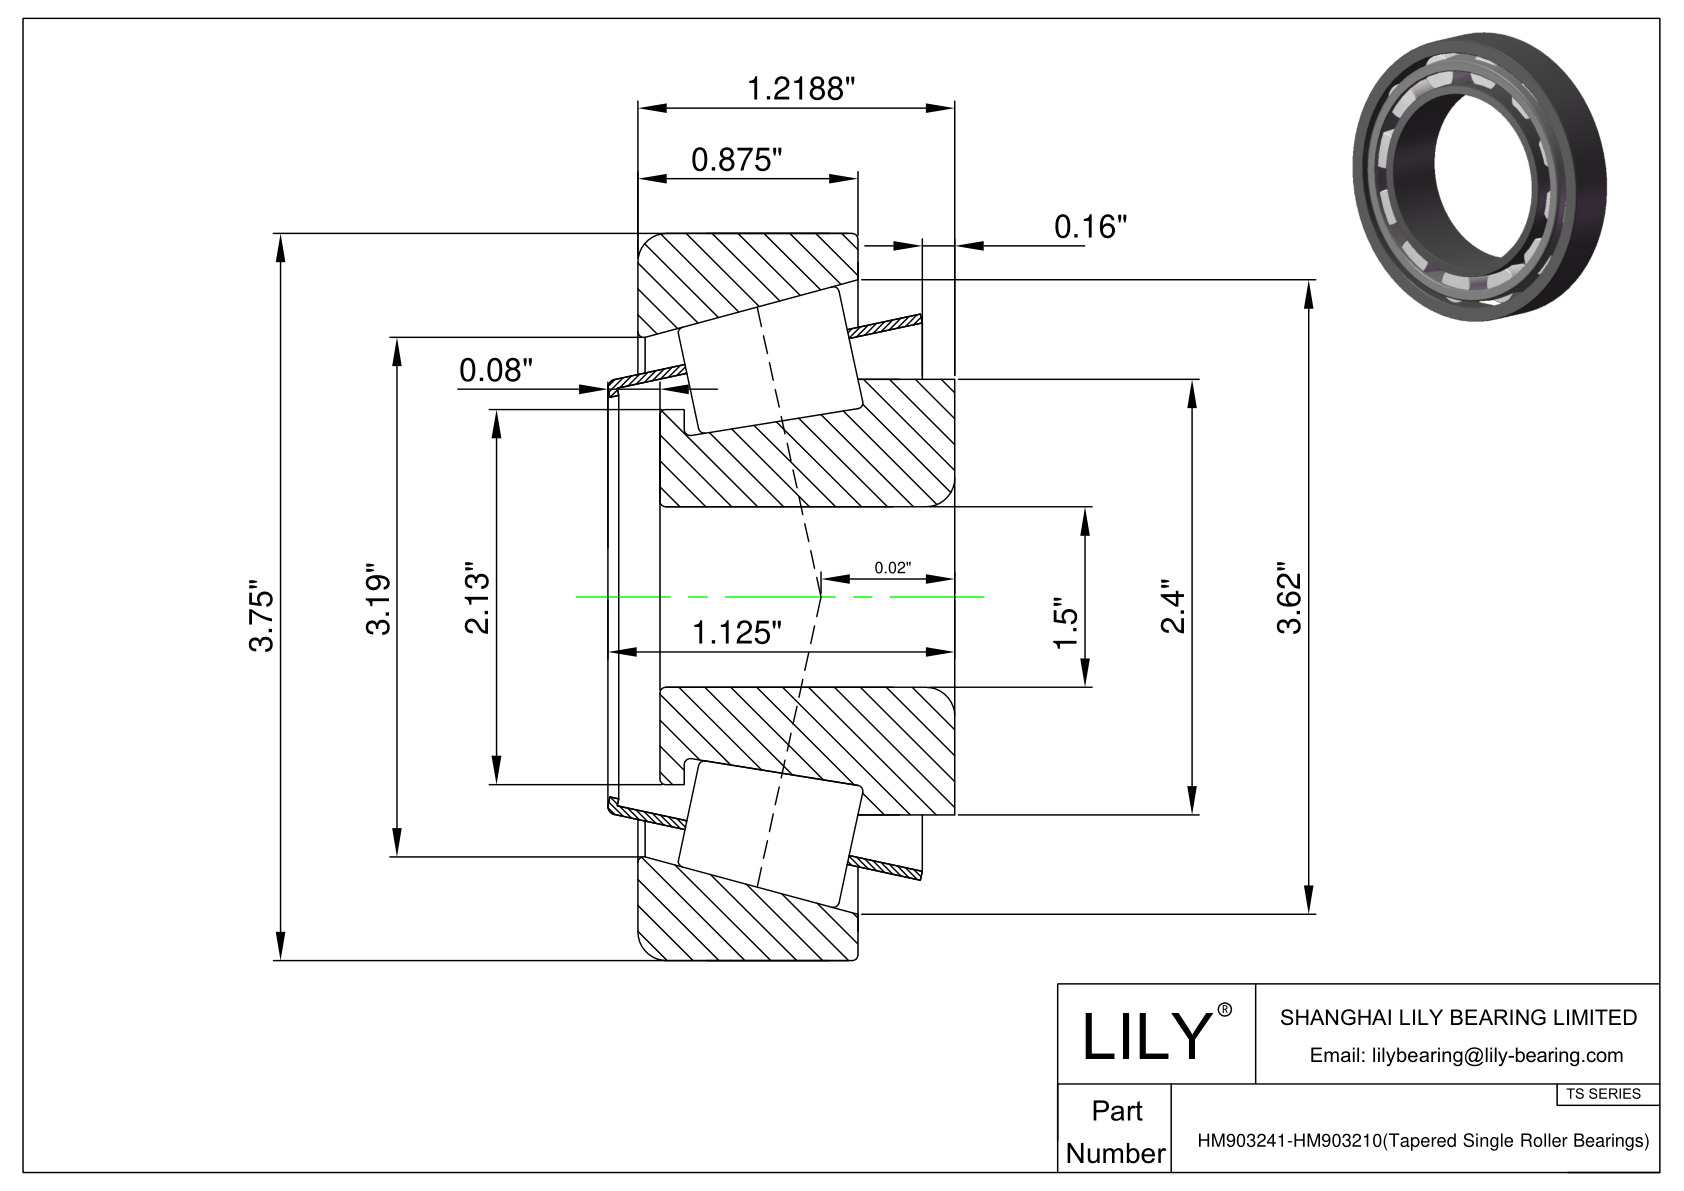 HM903241-HM903210 TS (Tapered Single Roller Bearings) (Imperial) cad drawing